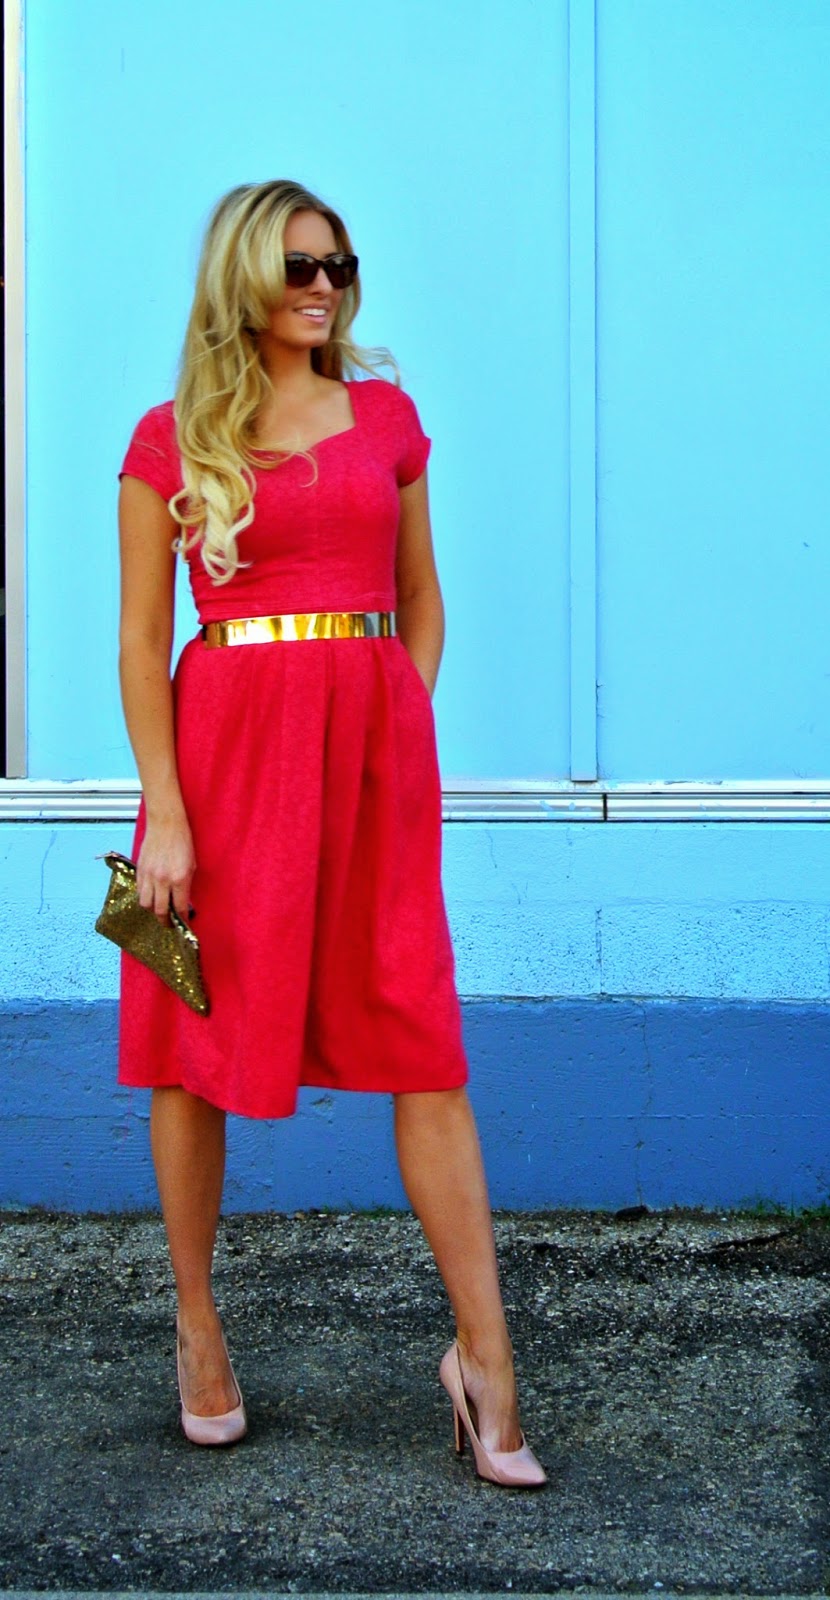 Blog about thrifting and refashioning.  Her entire outfit costs less than $30.Red dress with gold accessories. #tagsthrift